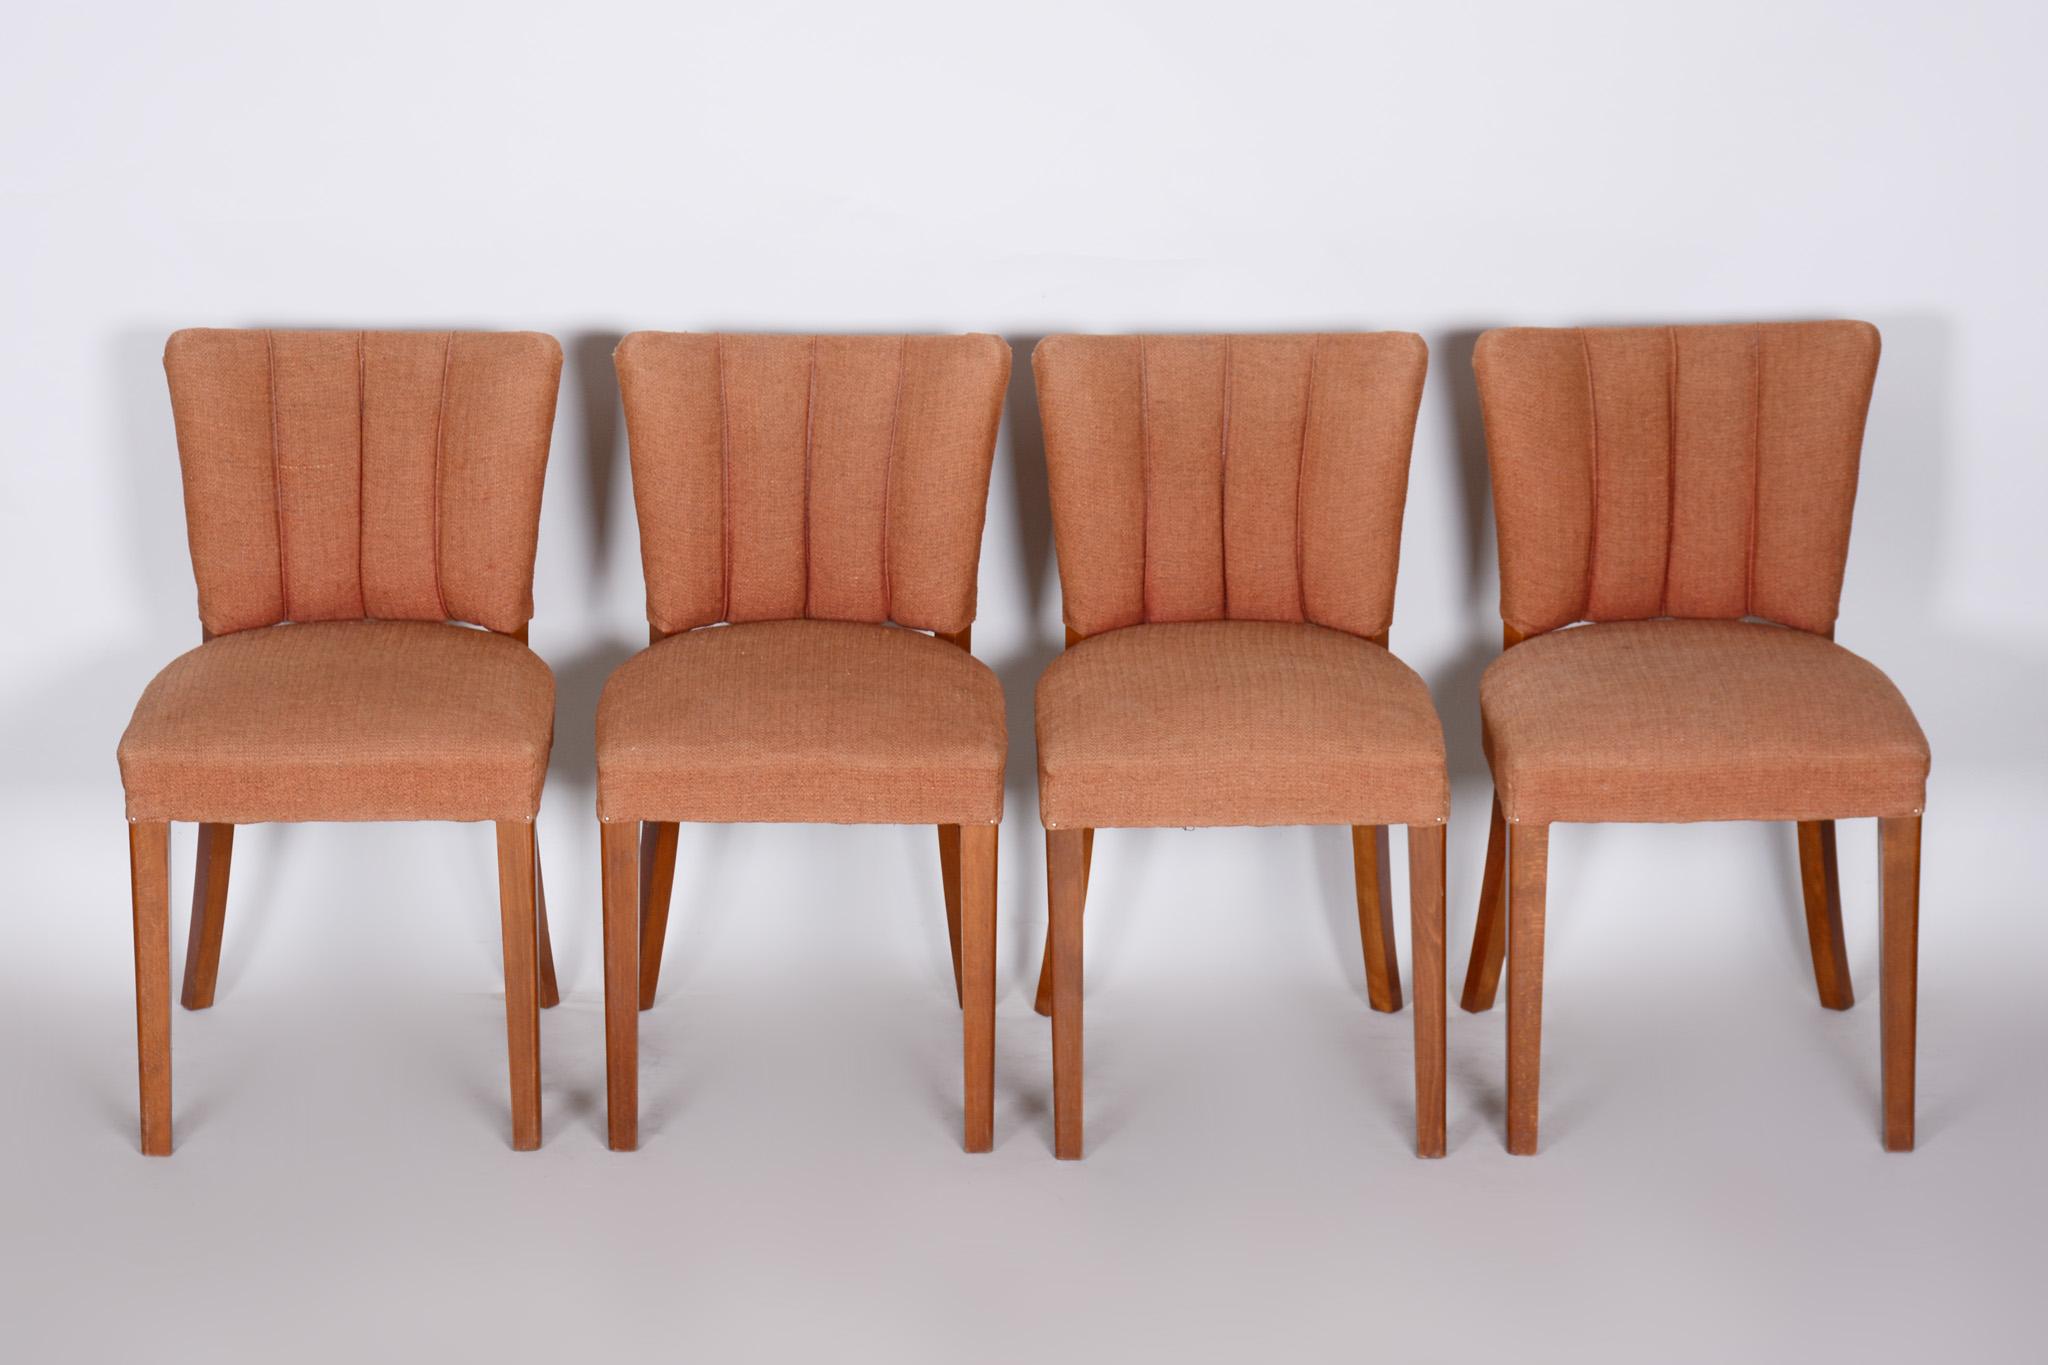 Art Deco chairs from Czechoslovakia, 1920-1929 new fabric and upholstery
Style: Art Deco.
Period: 1920-1929. 
Material: Walnut
With original fabric and upholstery, in pristine condition.